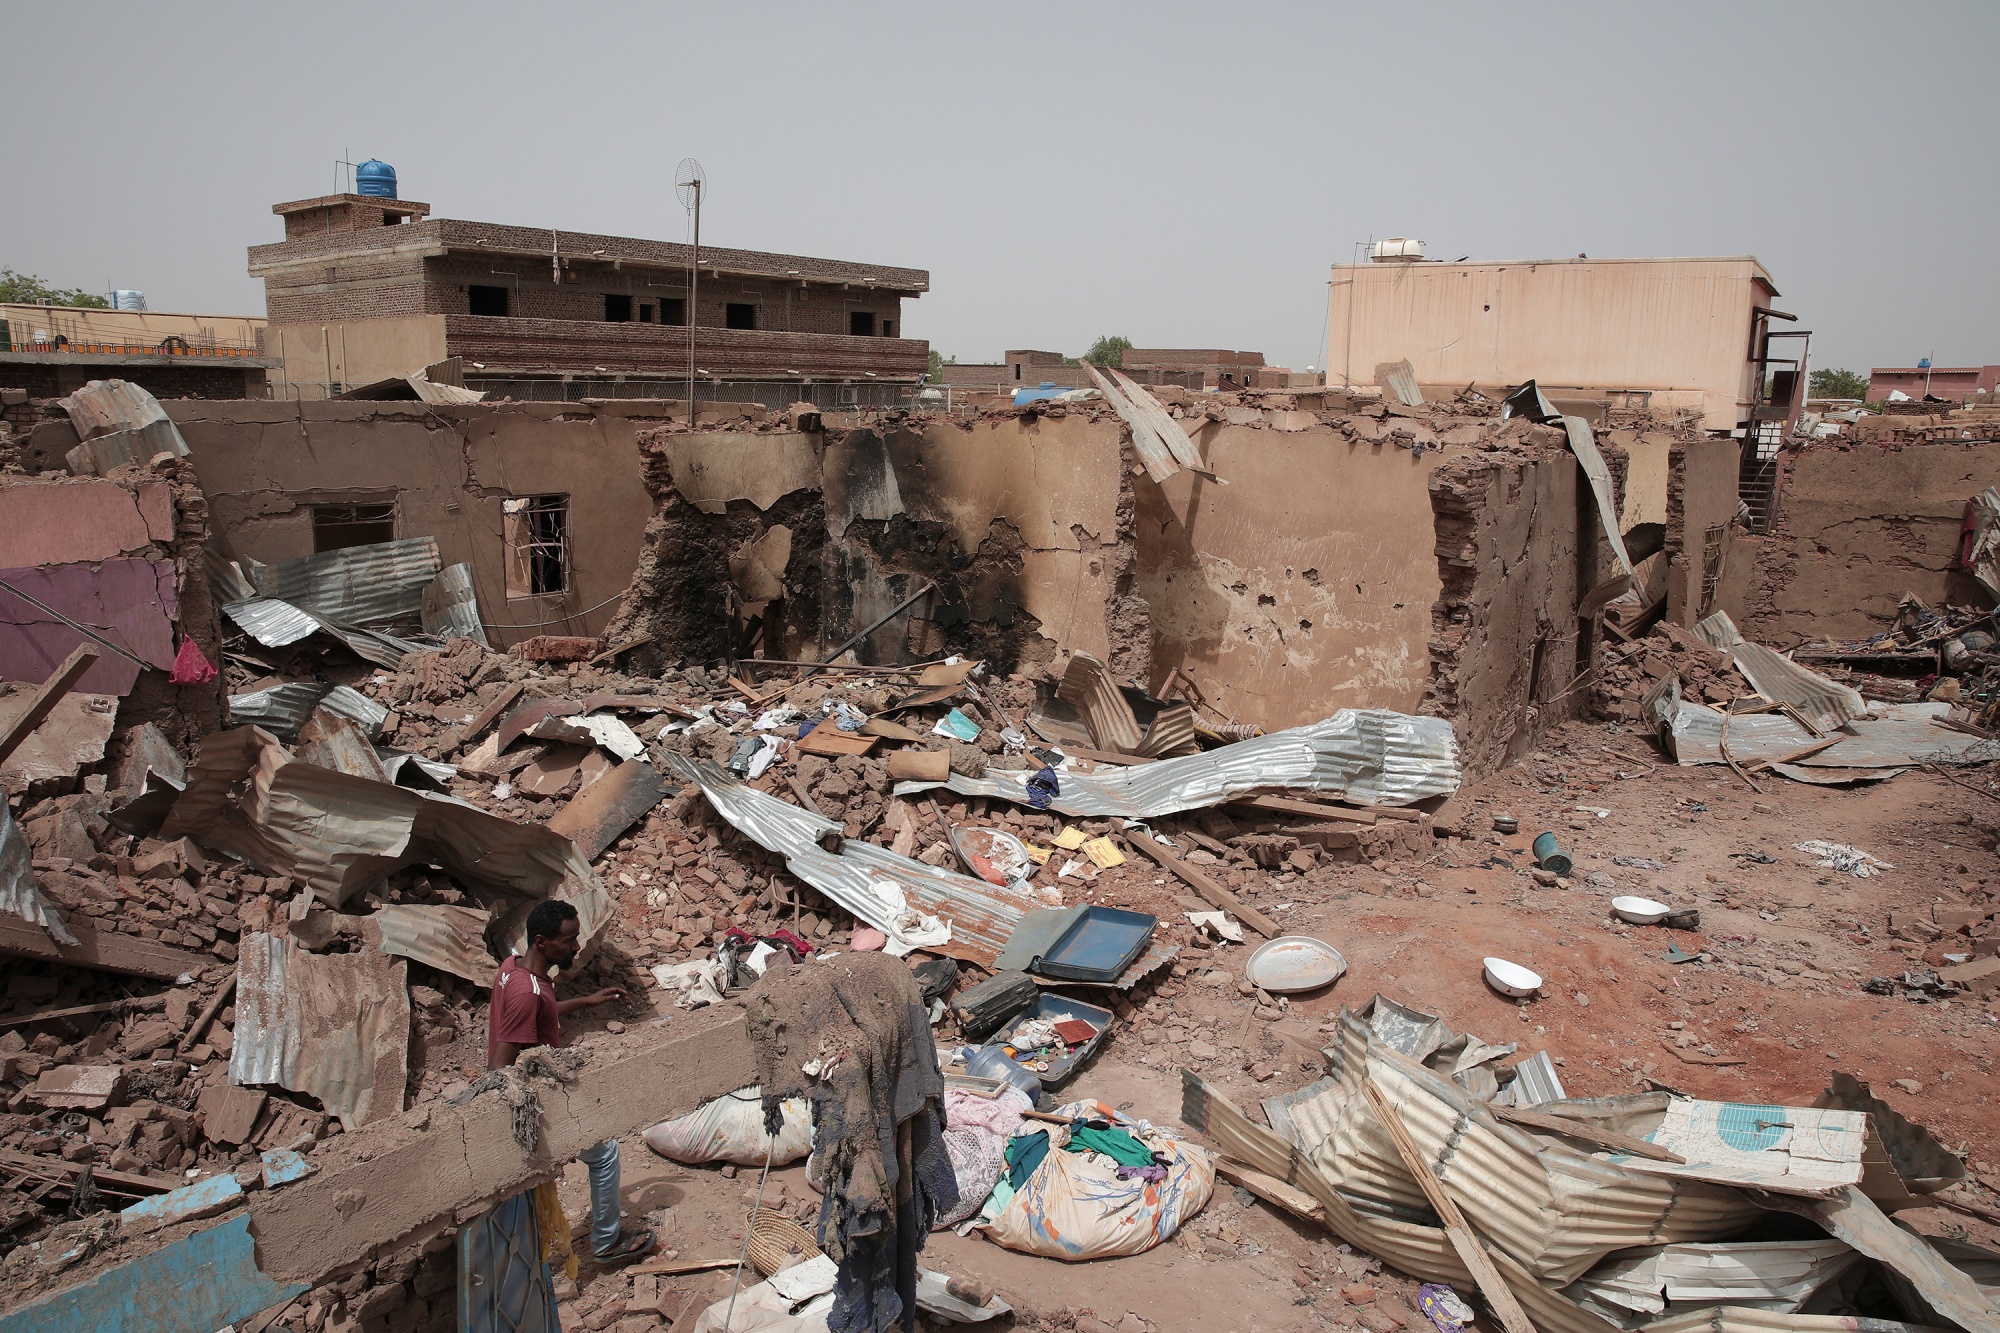 A man walks by a house damaged during&nbsp;recent fighting in Khartoum, Sudan, on April 25.